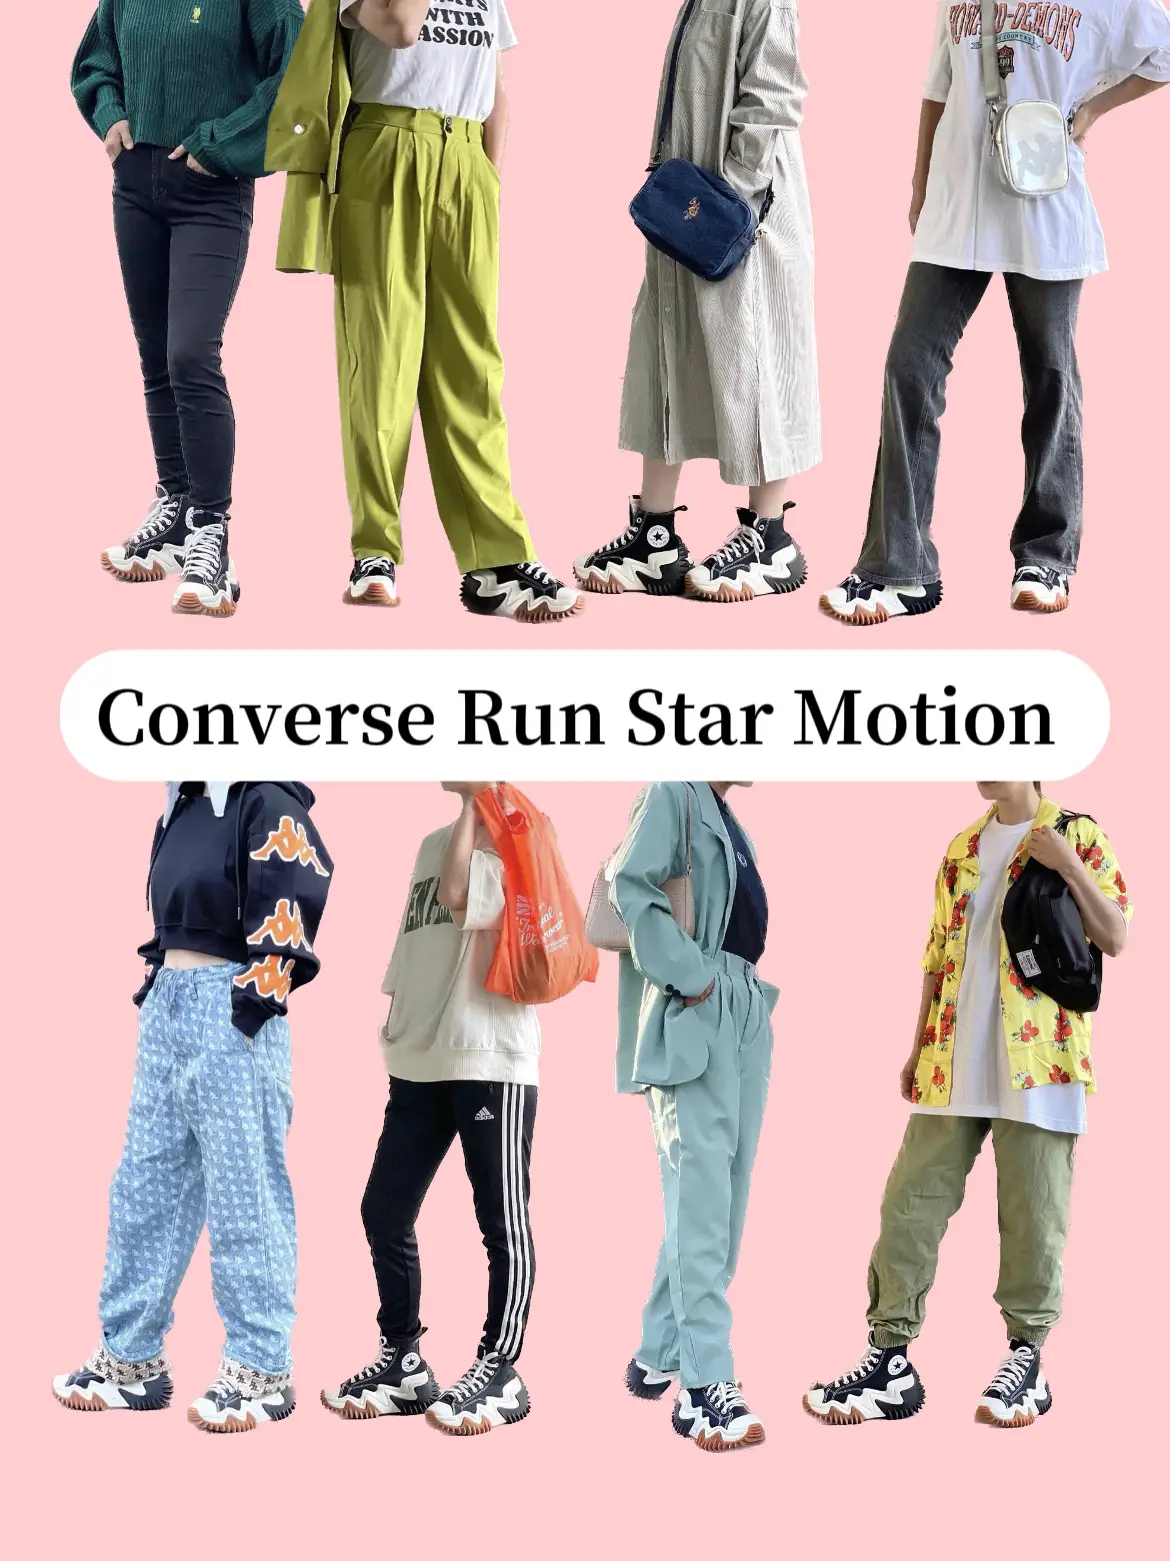 Converse Run Star Motion | Gallery posted by Ma | Lemon8